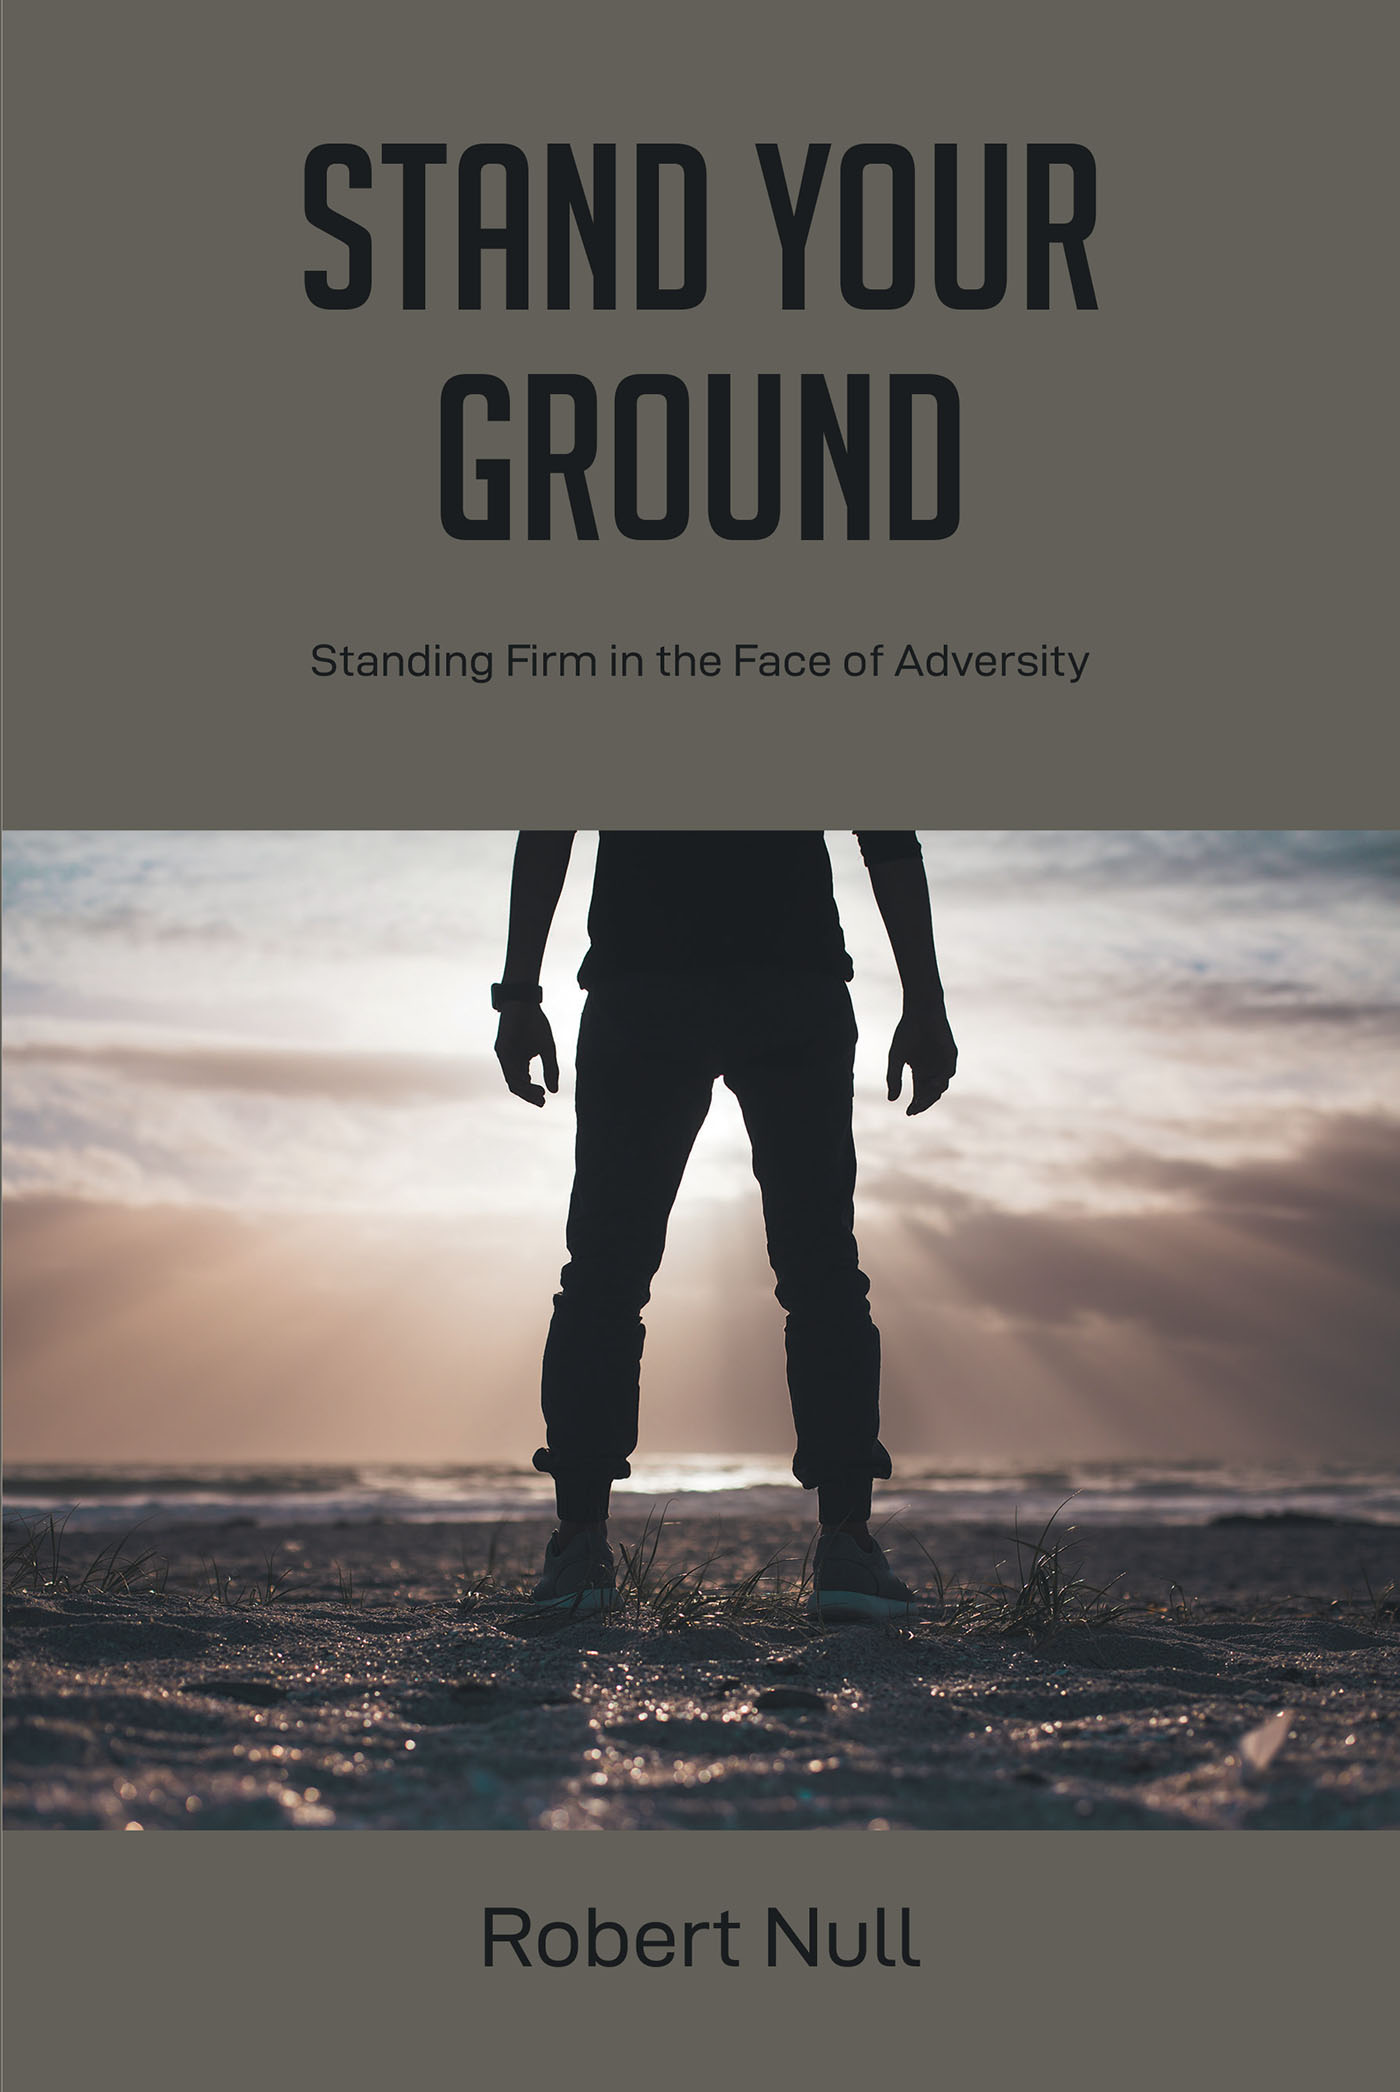 Author Robert Null’s New Book, "Stand Your Ground," Explores the Ways in Which God's Followers Can Stand in His Name and How Pastors Can Prepare Their Flock to do so